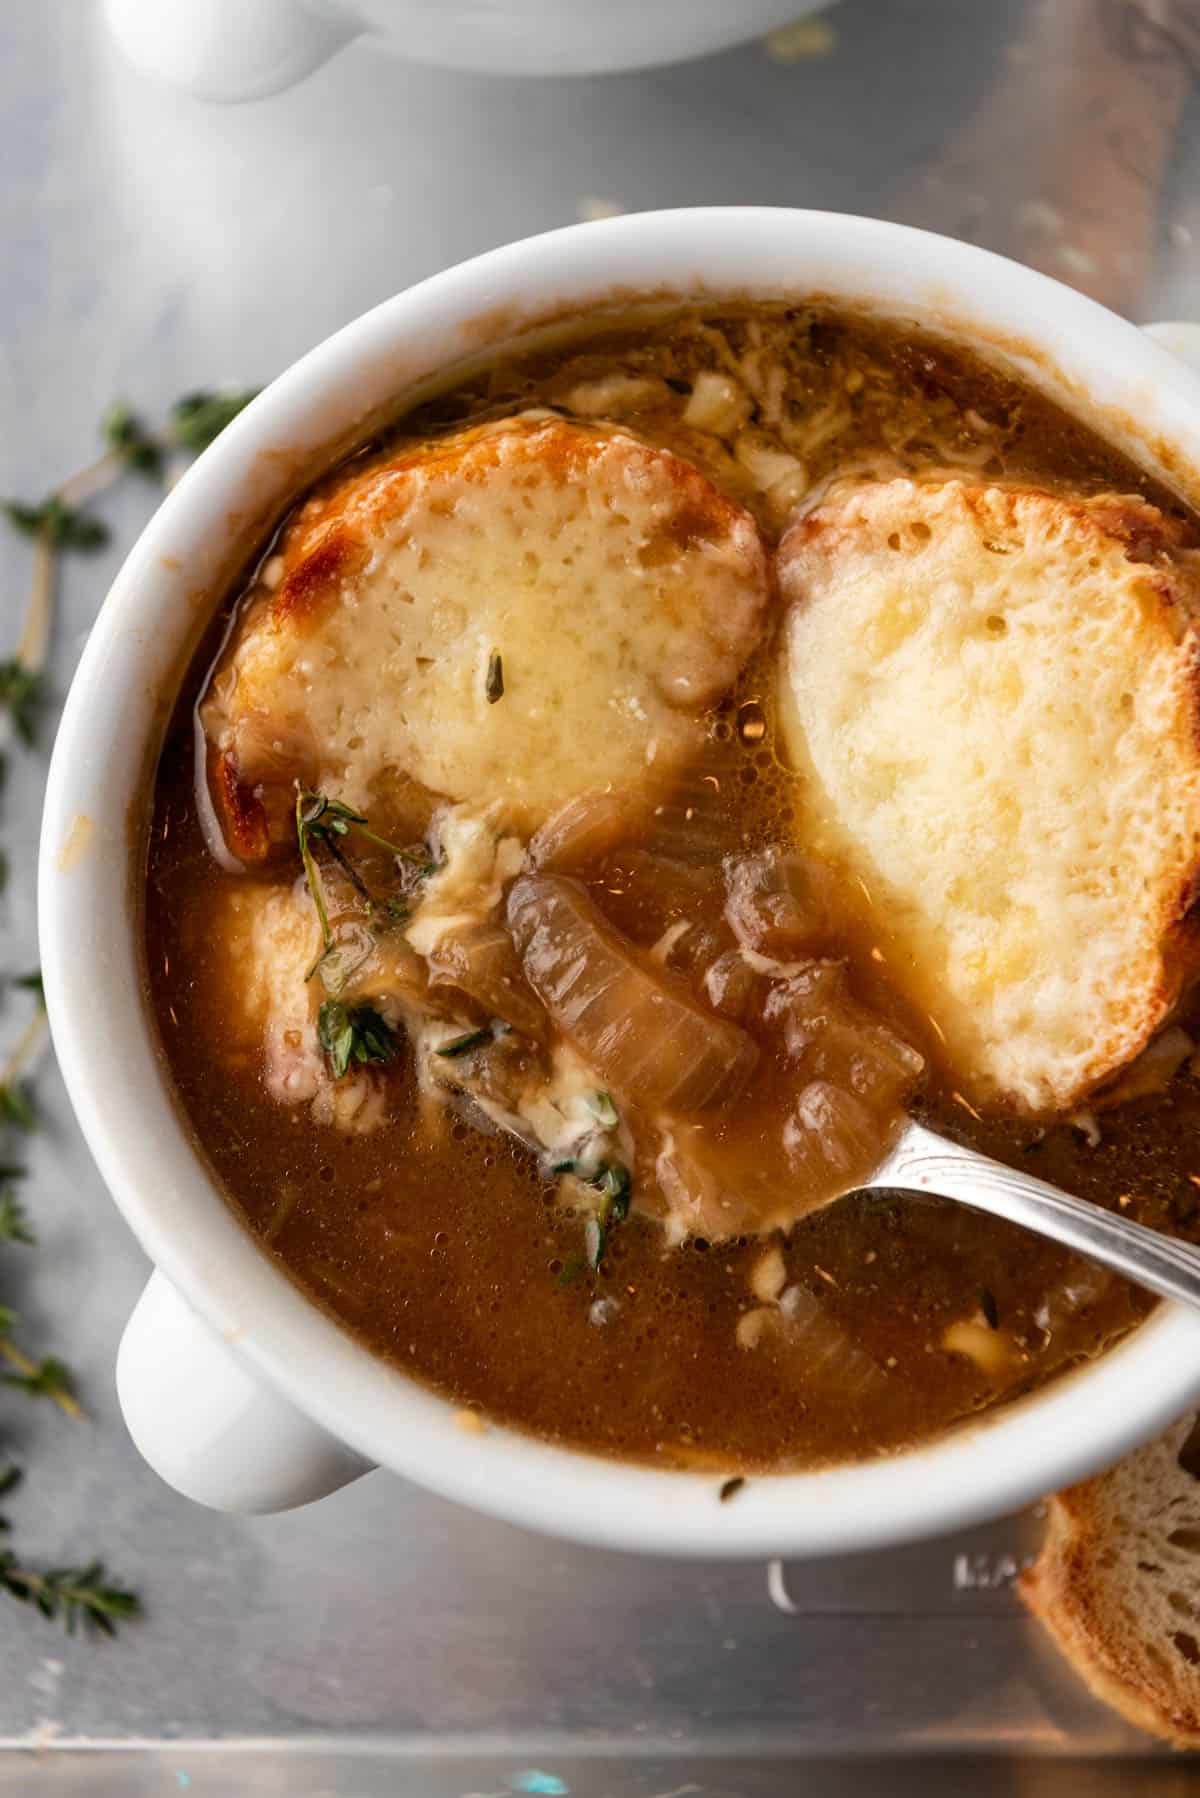 A spoon in a bowl of French onion soup.